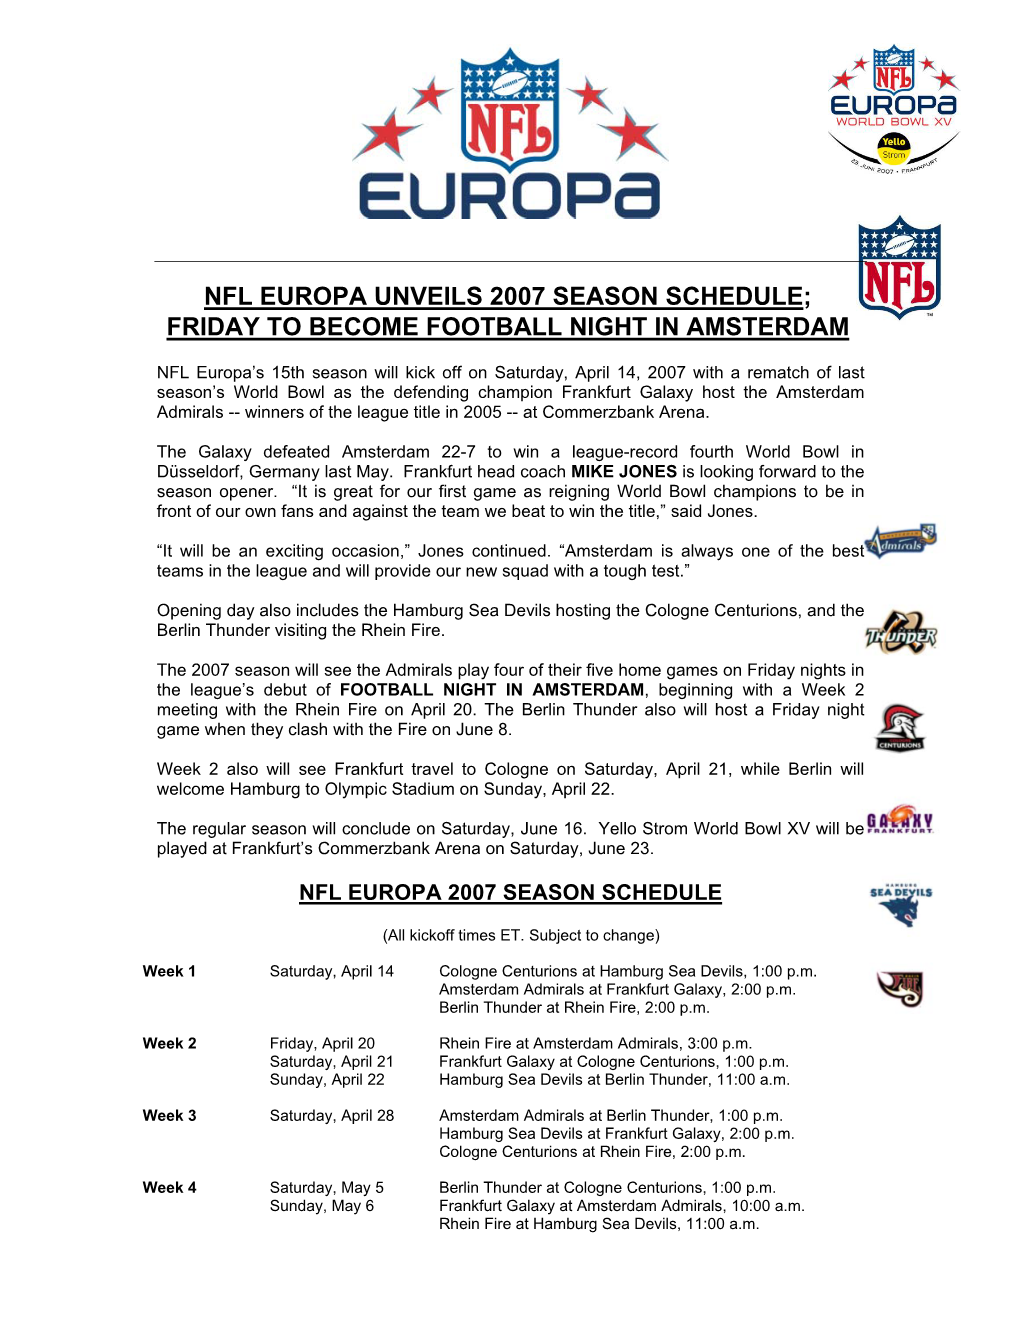 Nfl Europa Unveils 2007 Season Schedule; Friday to Become Football Night in Amsterdam